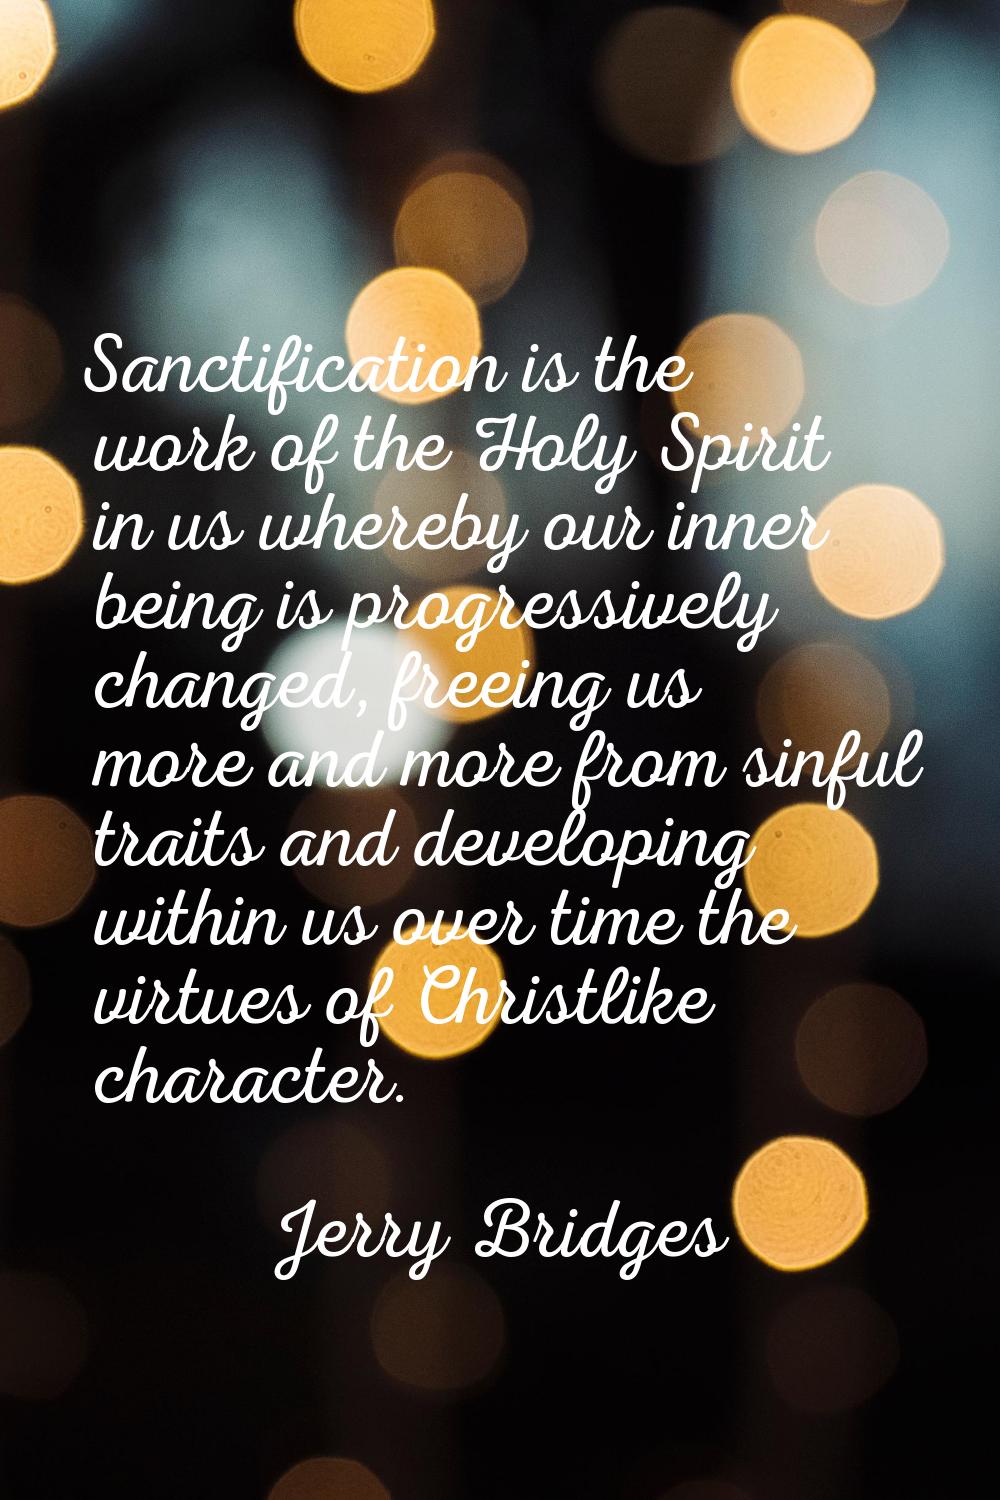 Sanctification is the work of the Holy Spirit in us whereby our inner being is progressively change